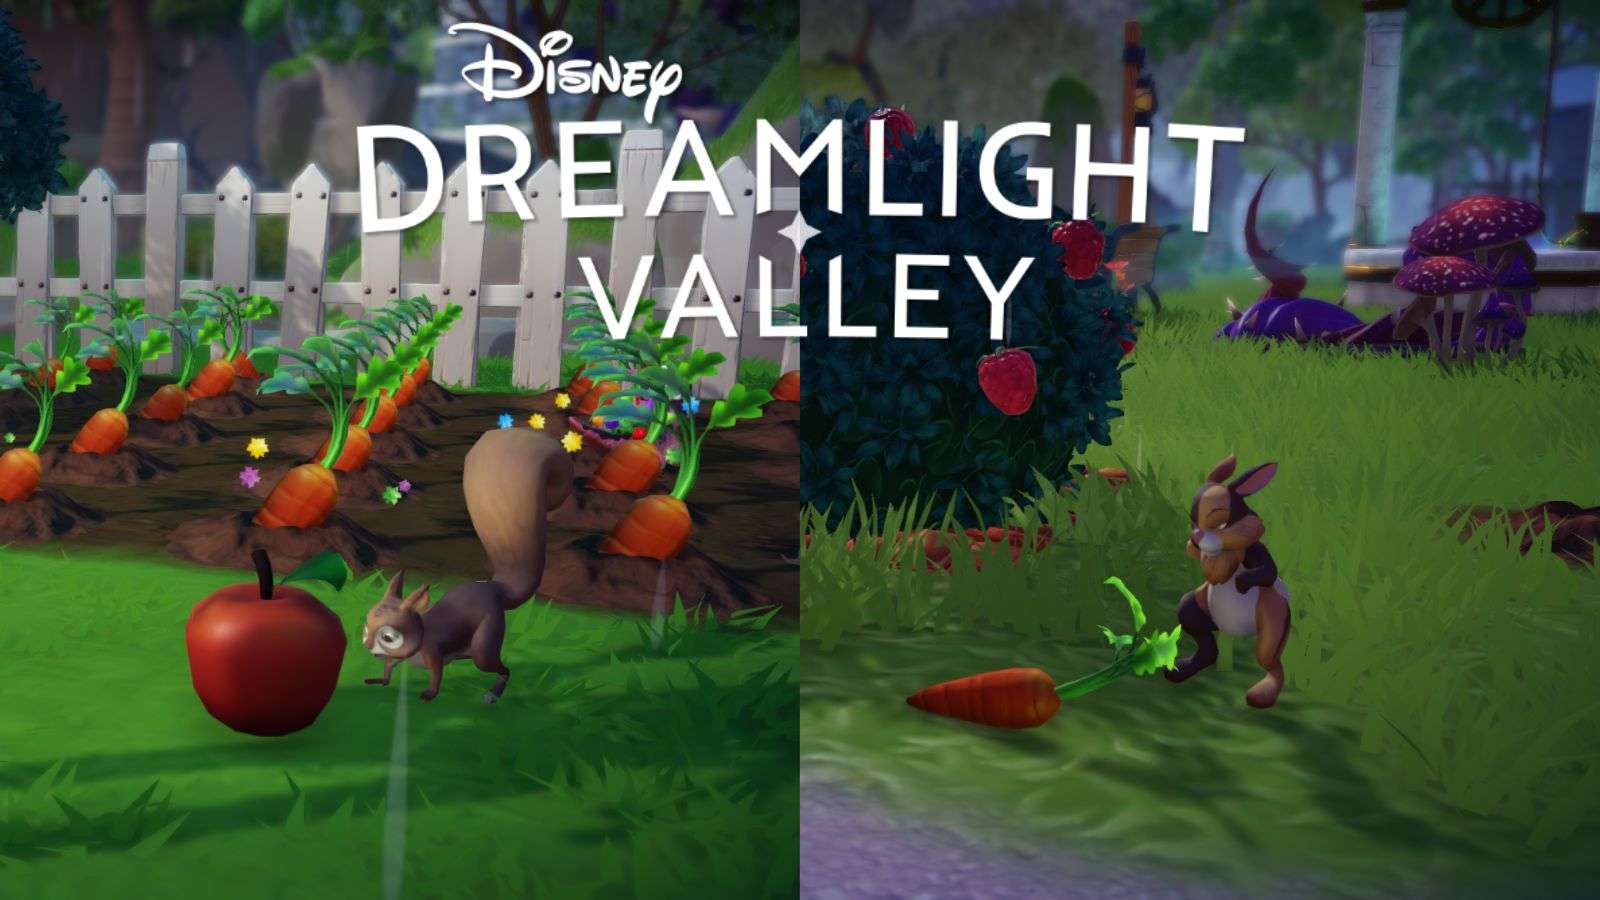 Feeding a squirrel and a rabbit in Disney Dreamlight Valley